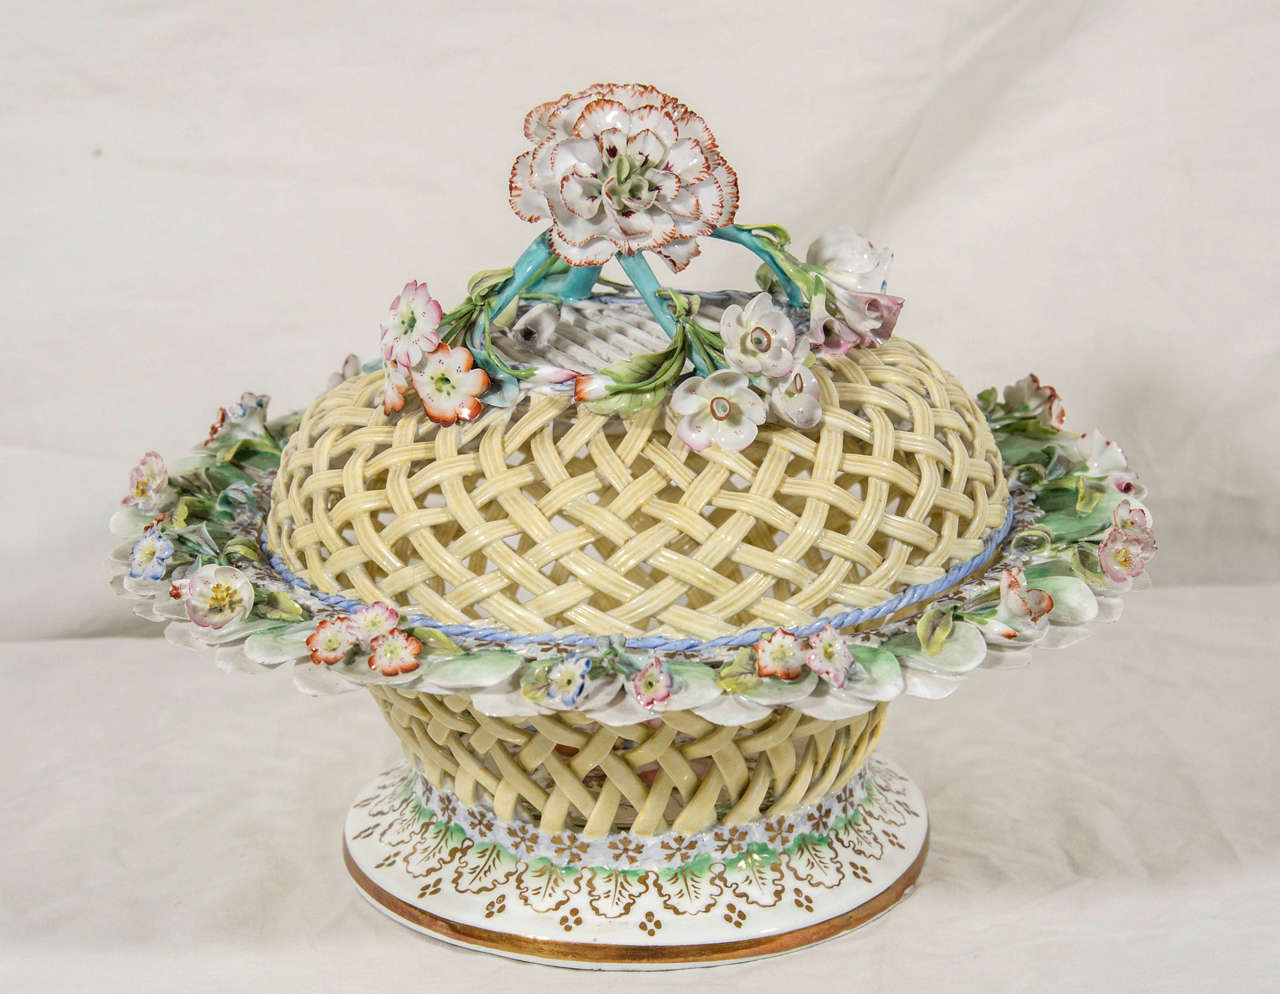 A large porcelain carnation rests on the top of the cover of this Ridgway Porcelain basket. The soft yellow color of the latticework basket is enhanced by the pale pastel colors of the flowers. The interior well is decorated with a bouquet of well